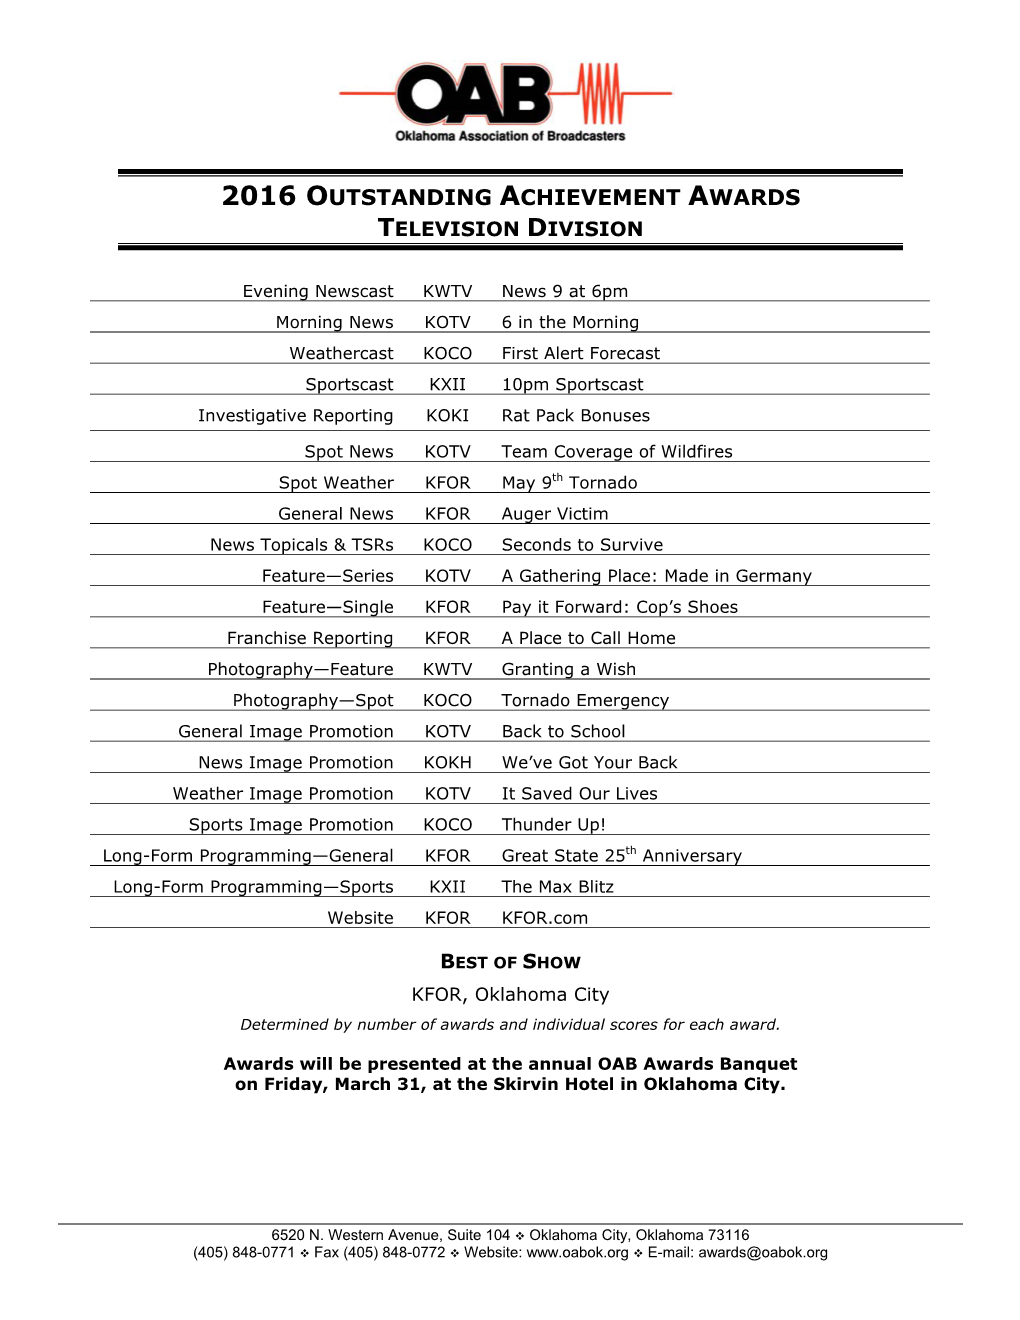 2016 Outstanding Achievement Awards Television Division